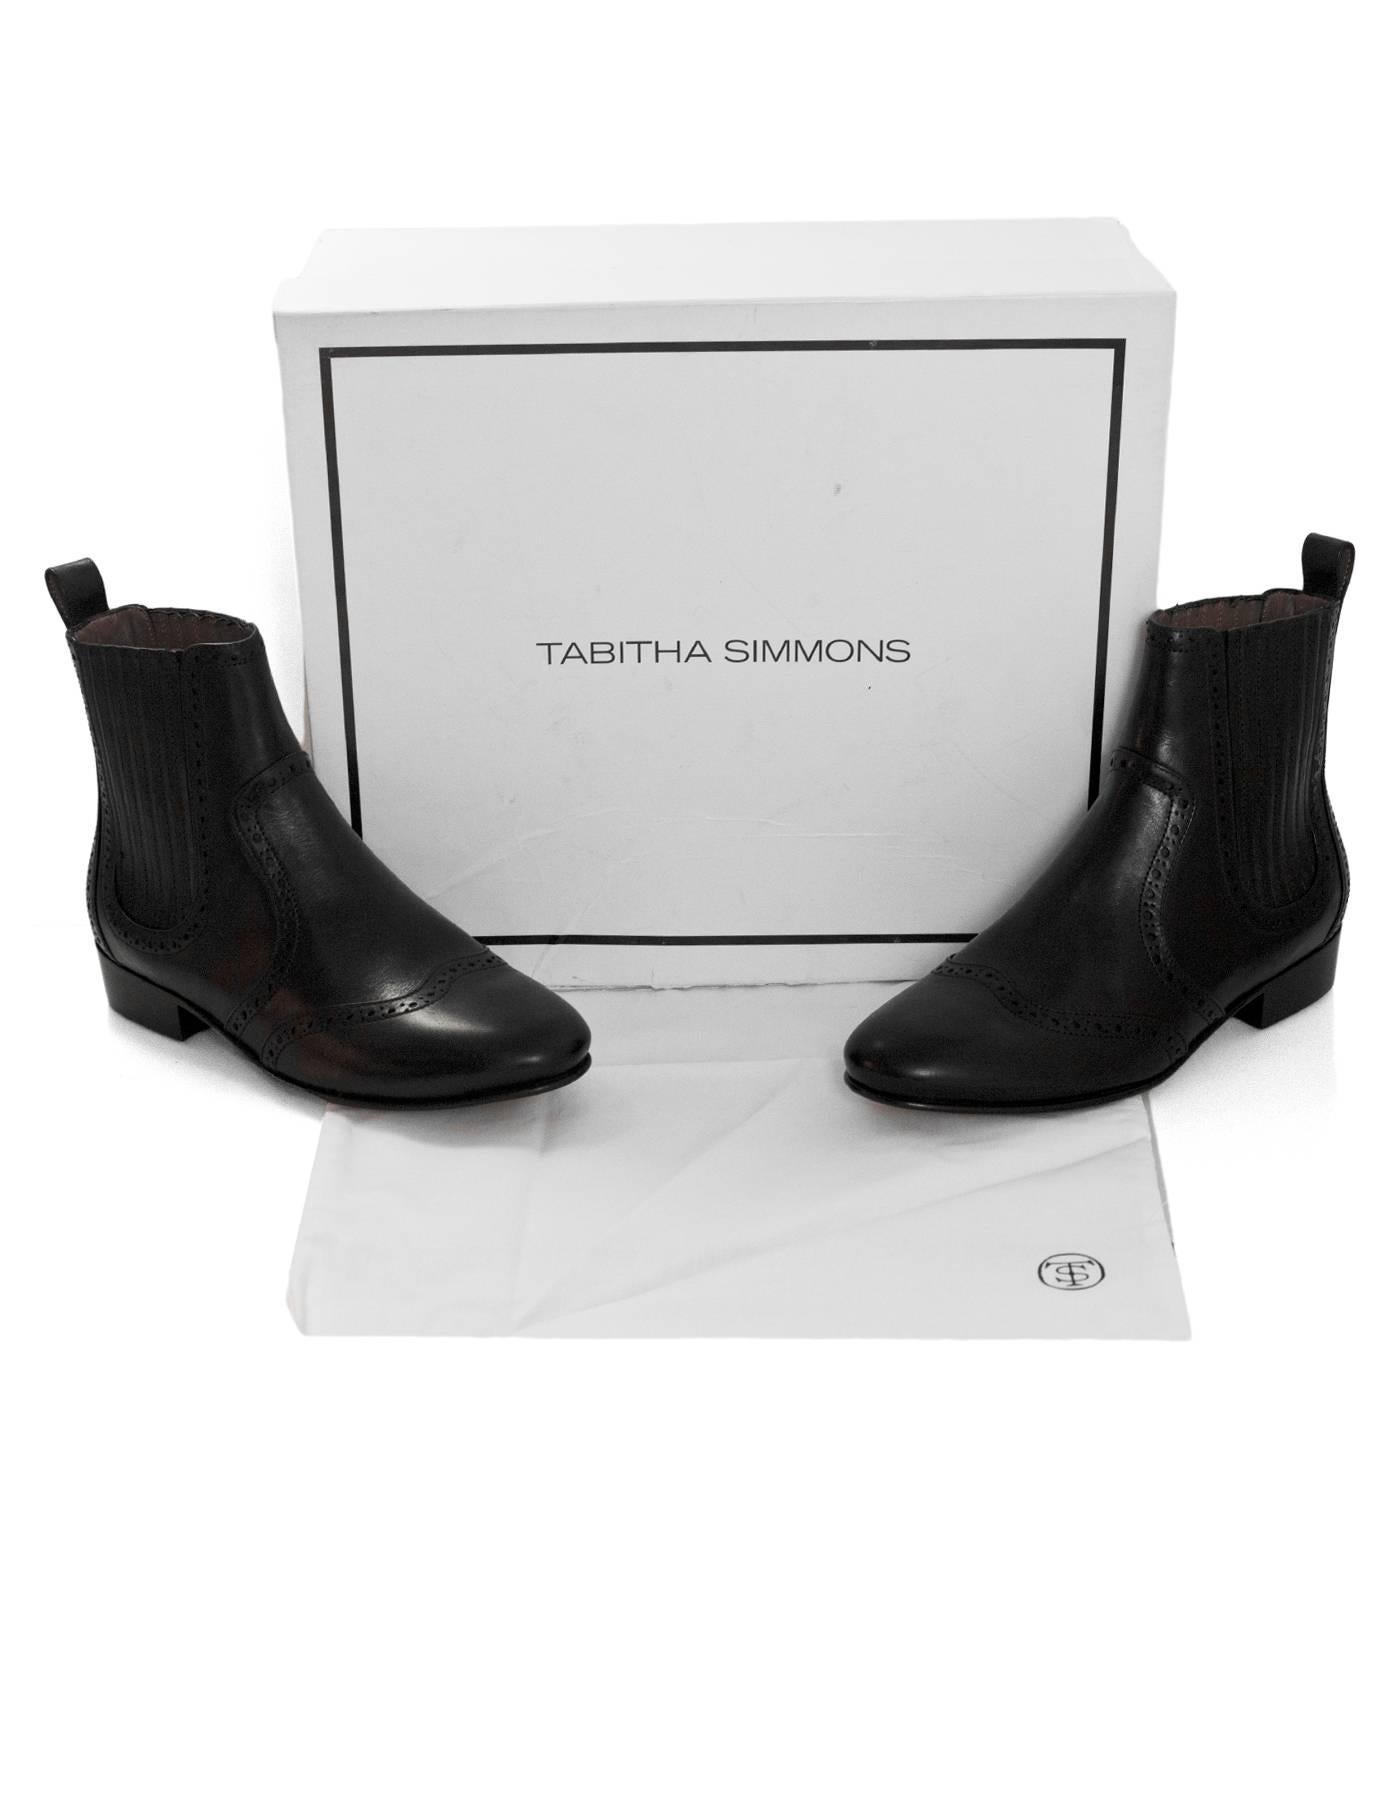 Tabitha Simmons Black Spectator Sibley Ankle Boots Sz 36 with Box, DB 1